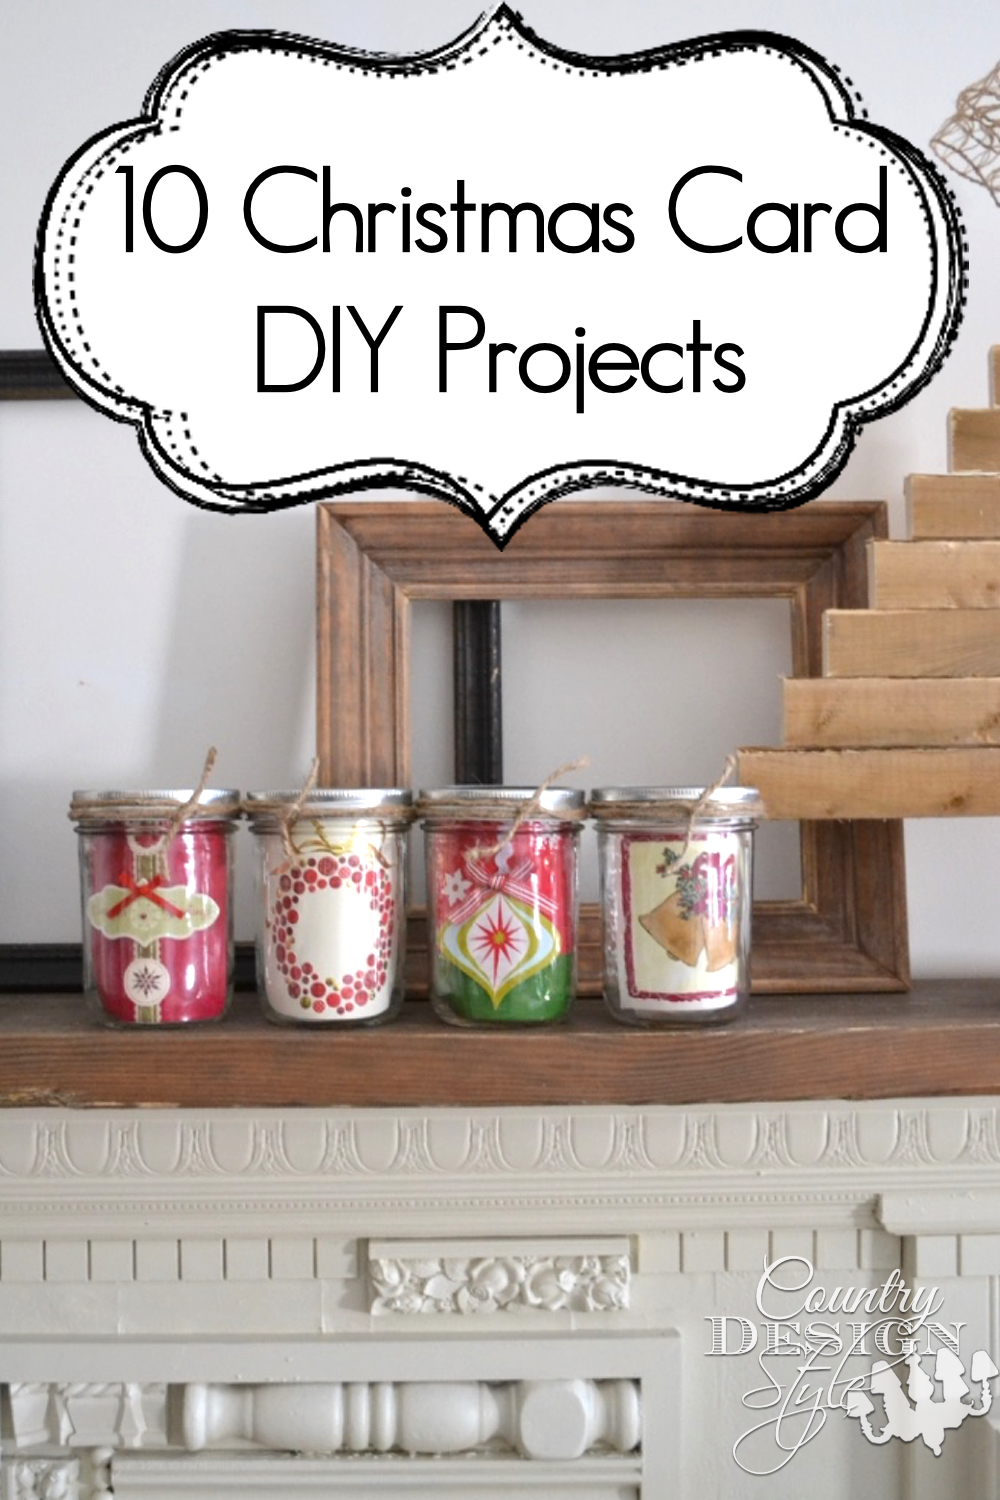 10 Holiday Card DIY Projects | Country Design Style | countrydesignstyle.com